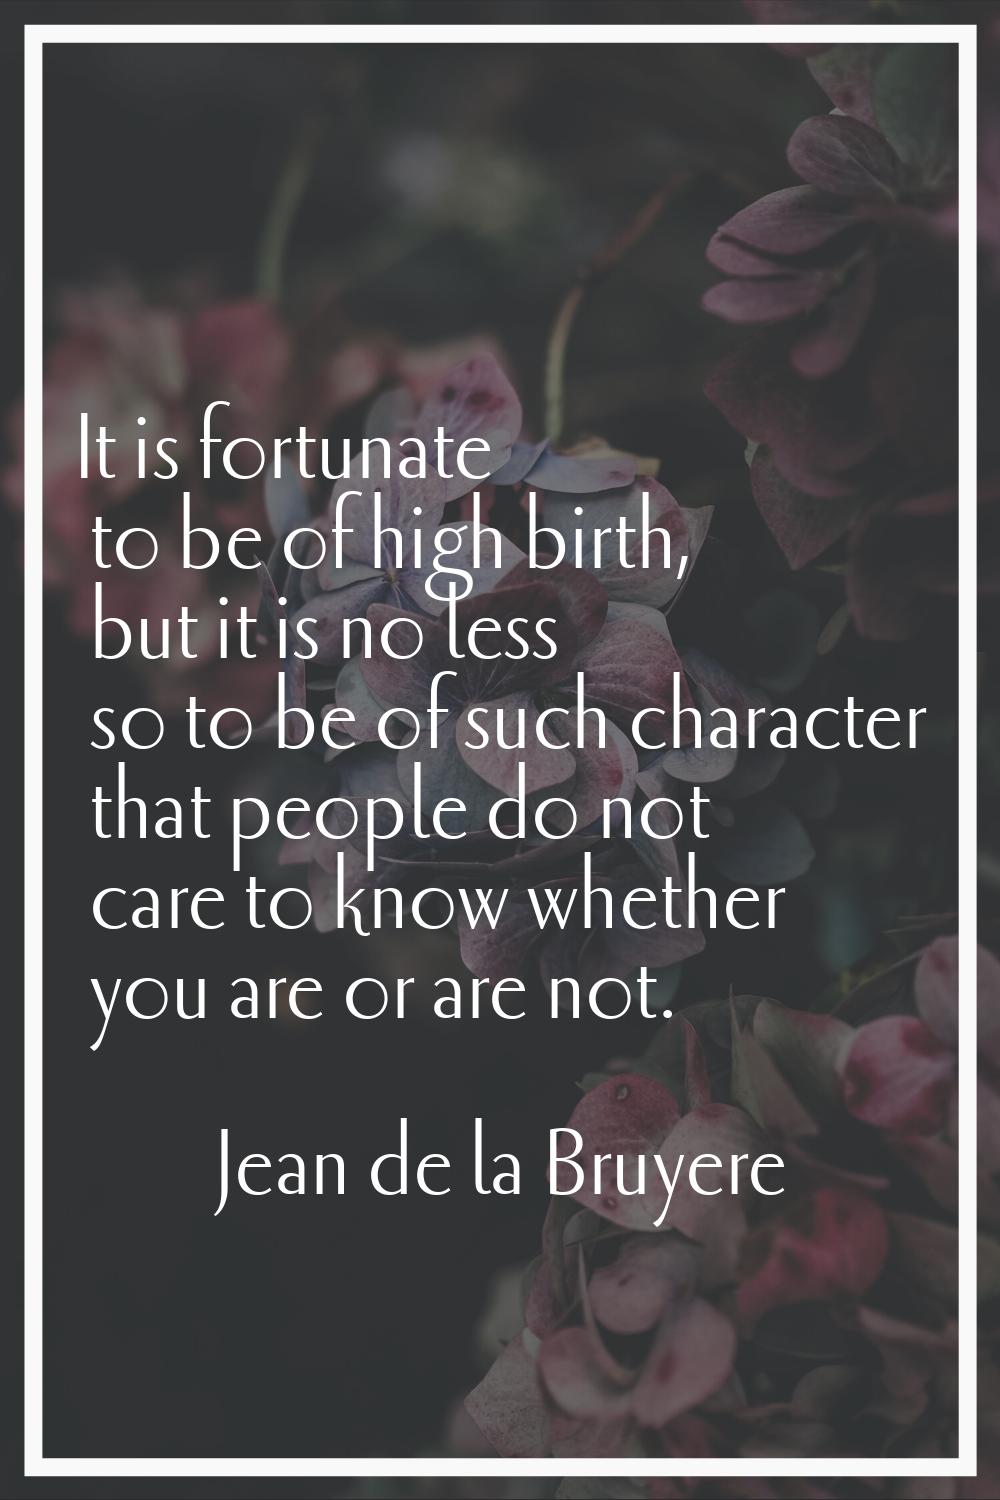 It is fortunate to be of high birth, but it is no less so to be of such character that people do no